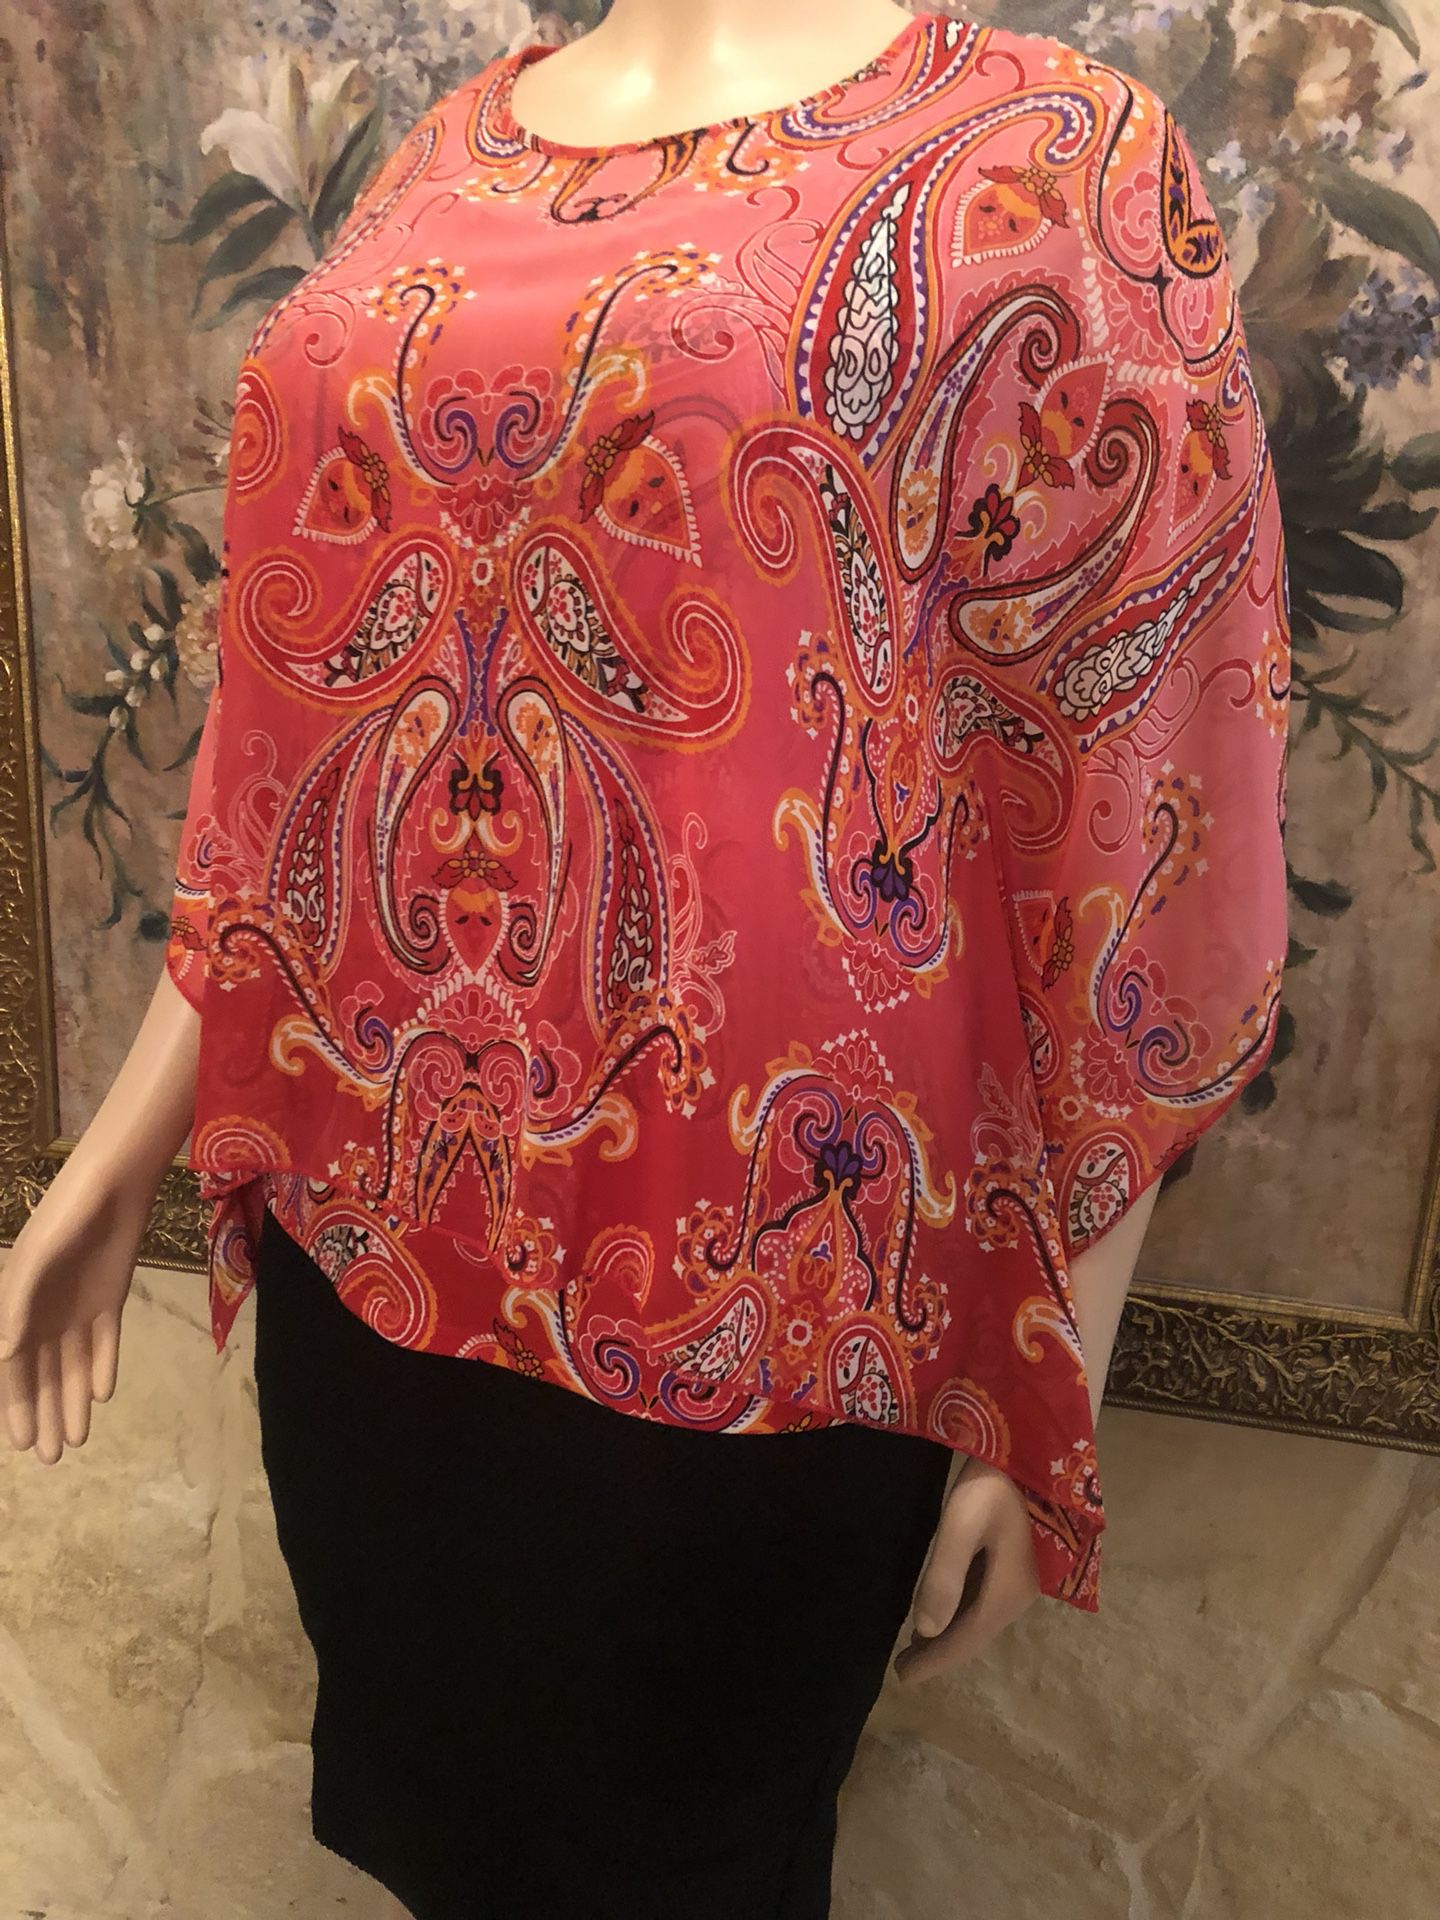 Brand New!!! Allison Daley Blouse in Style